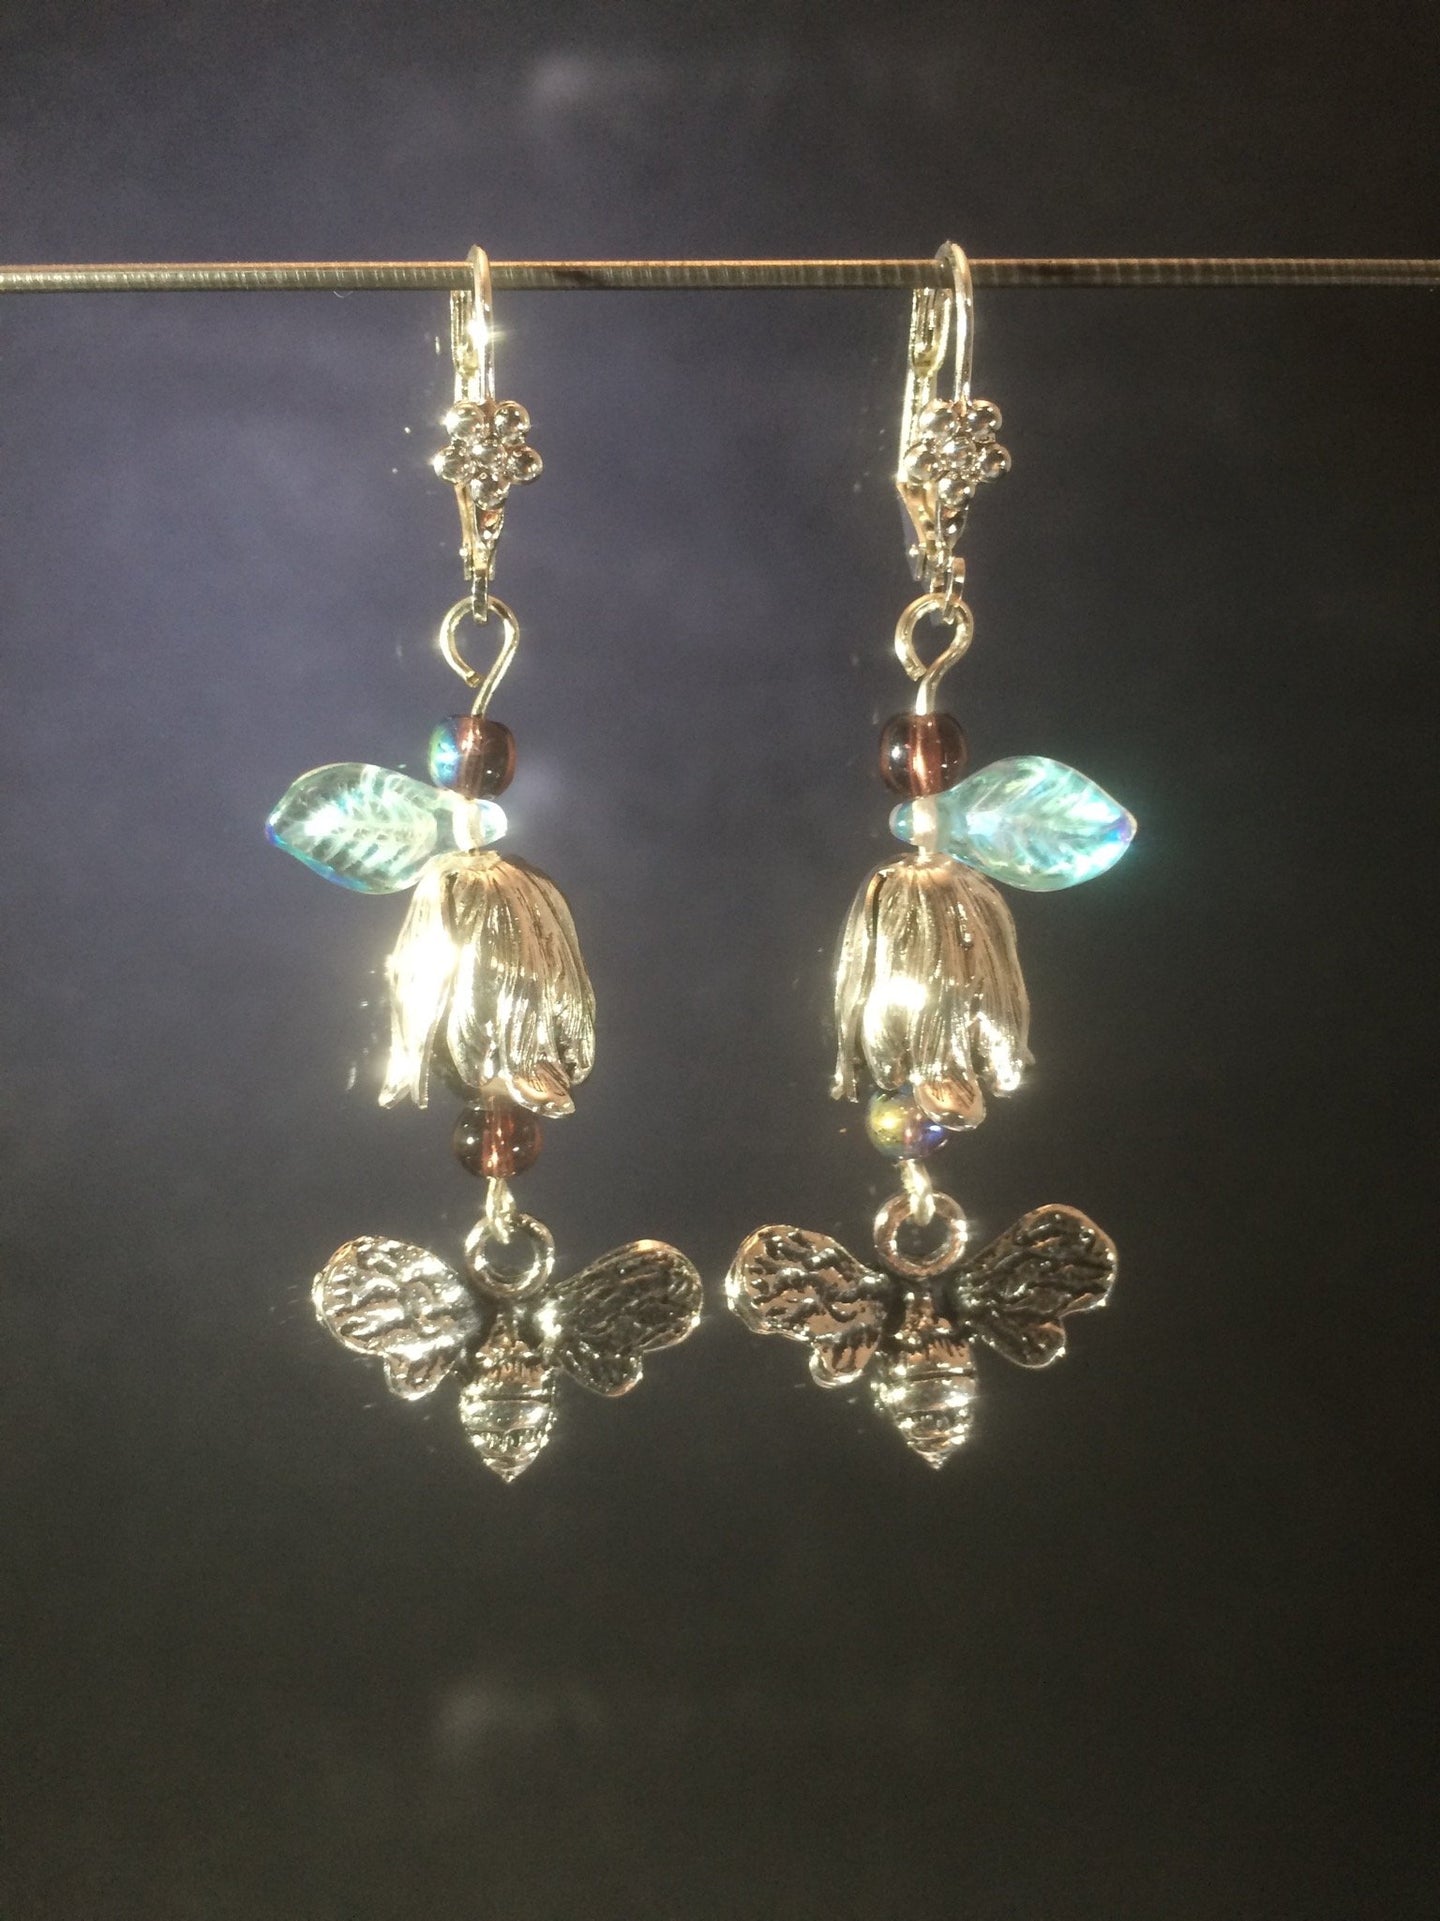 These leverback earrings feature silver plated zinc petwer charms of bees and flowers along with Czech pressed glass leaves and glass pearls.